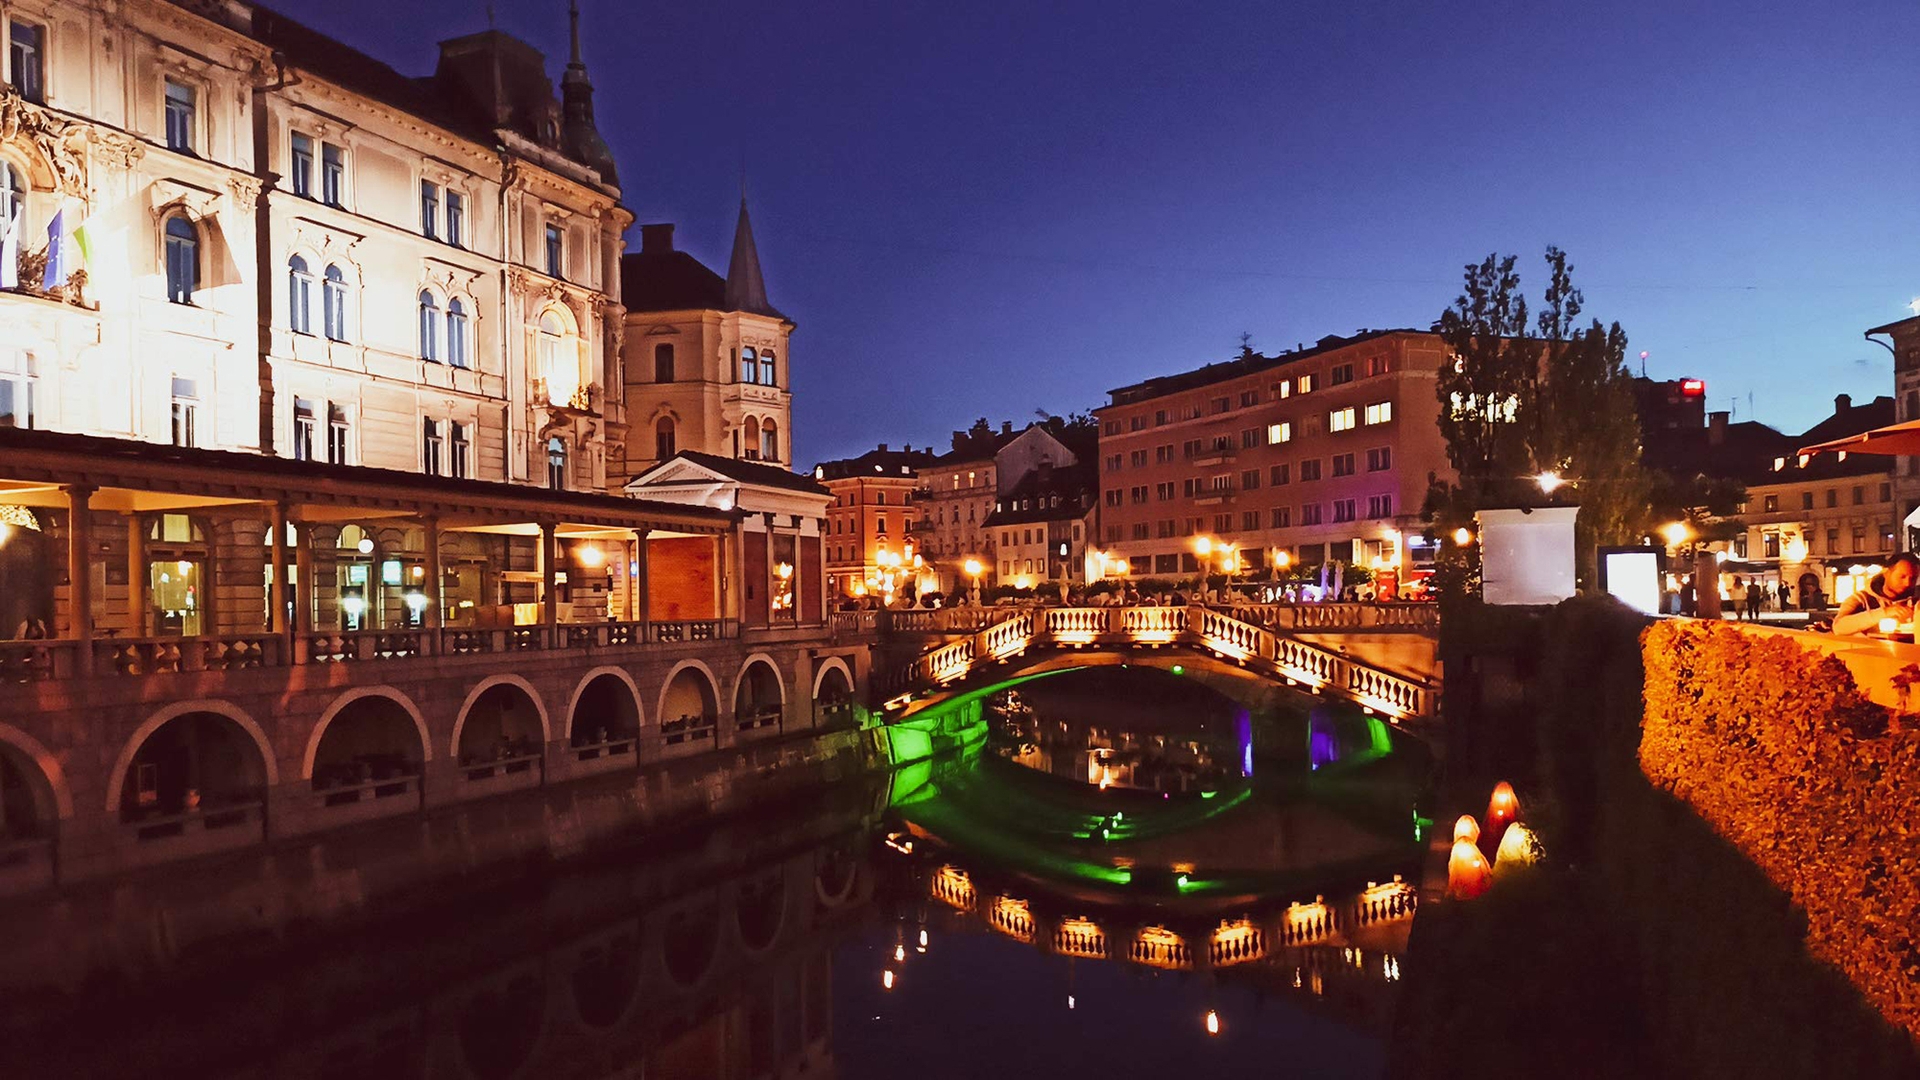 An image of a Slovenian city at night. There is a bridge over a canal with lights illuminating the bridge and surrounding buildings.